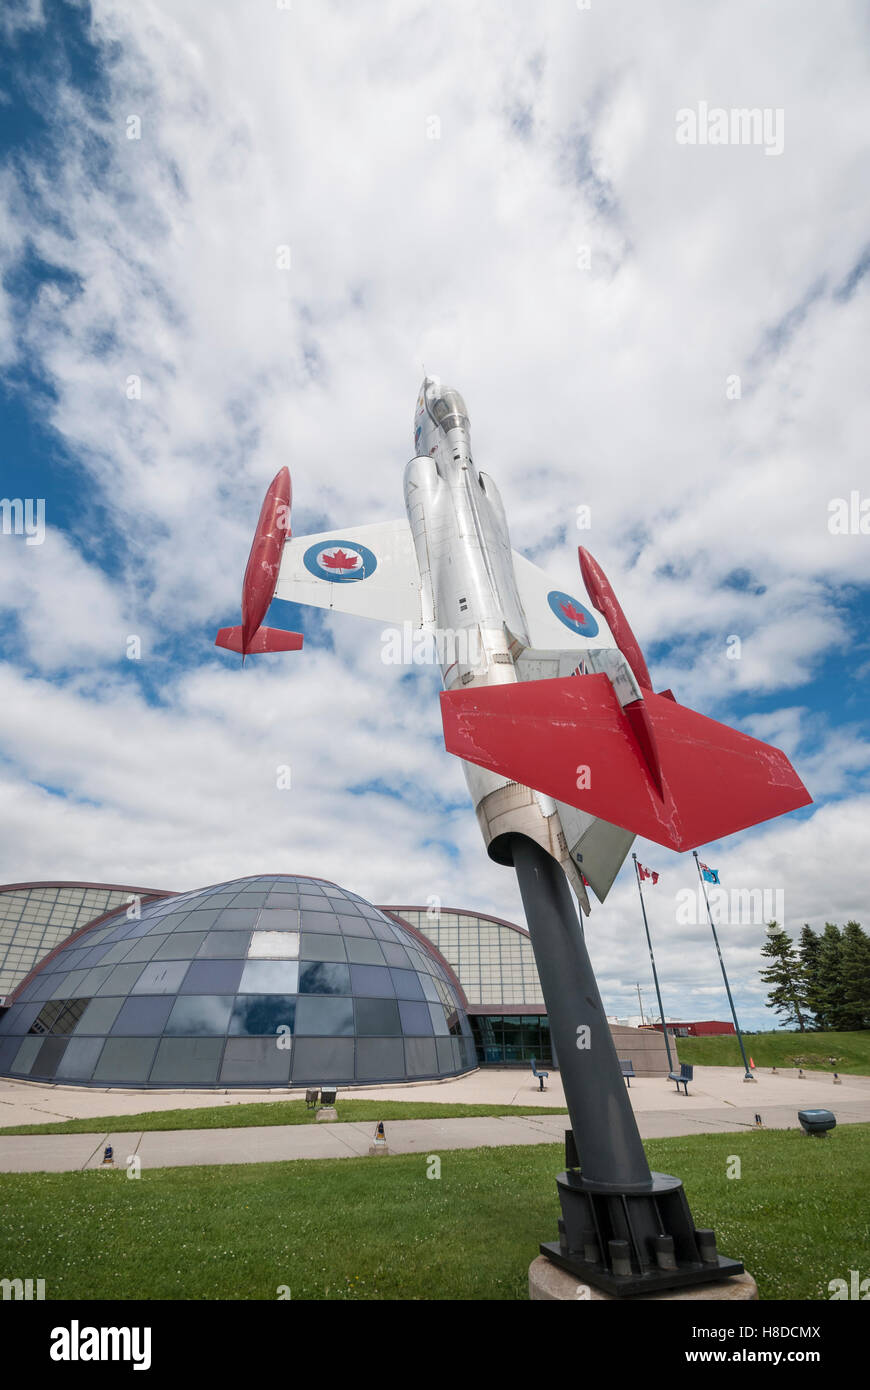 A Lockheed F-104 d Starfighter displayed on a pedestal outside the Canadian Warplane Museum in Hamilton Ontario Canada Stock Photo